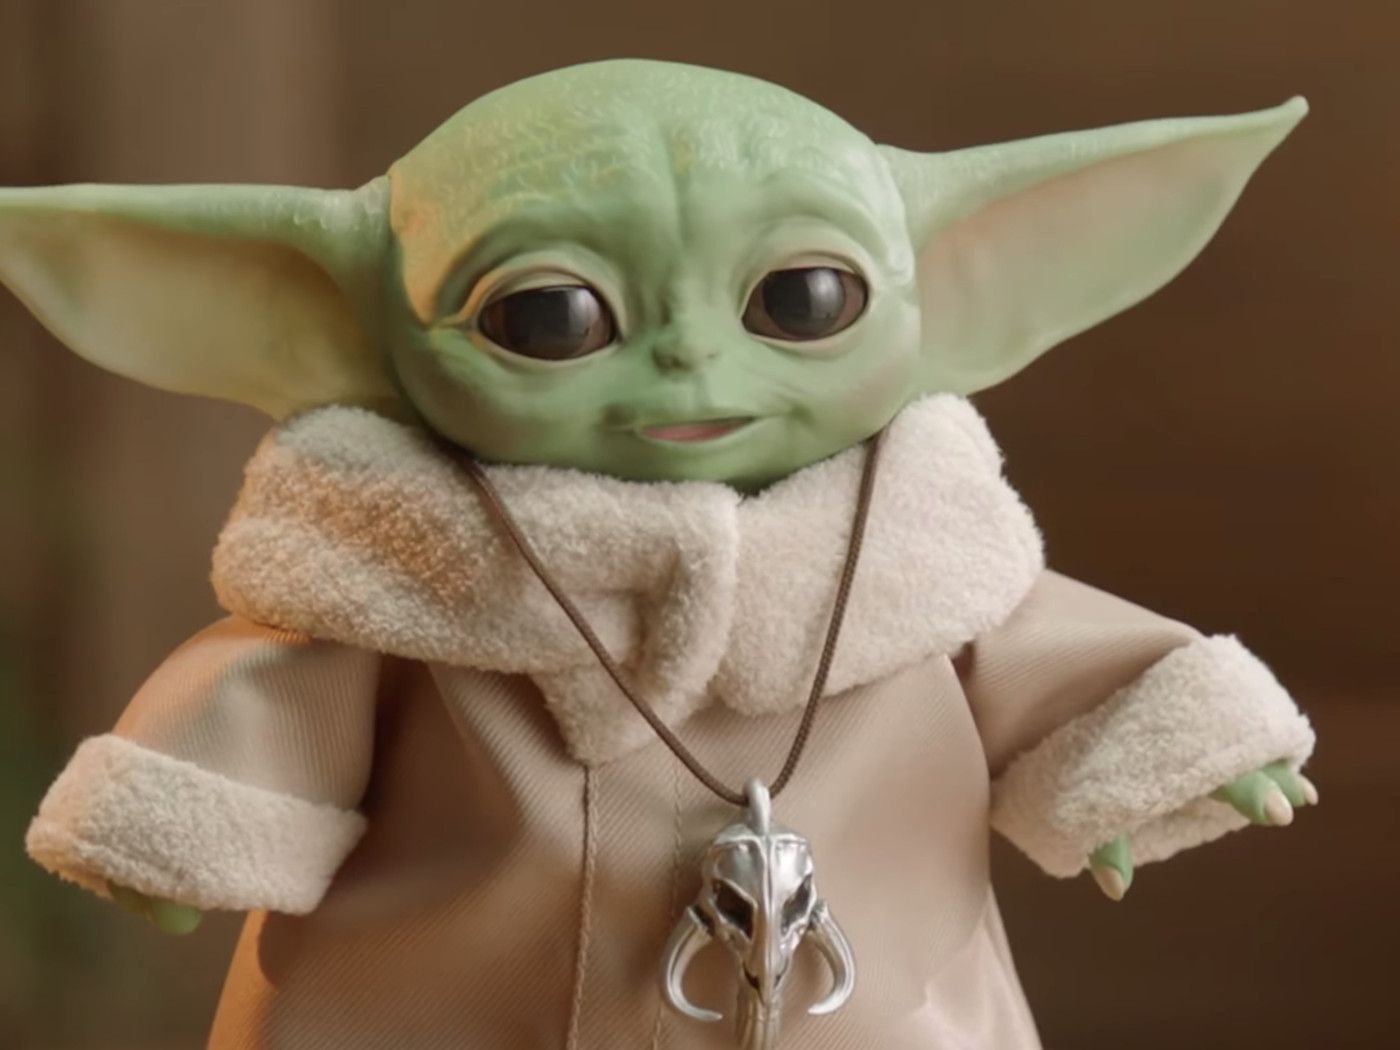 There's a new animatronic Baby Yoda. Here's how to get one